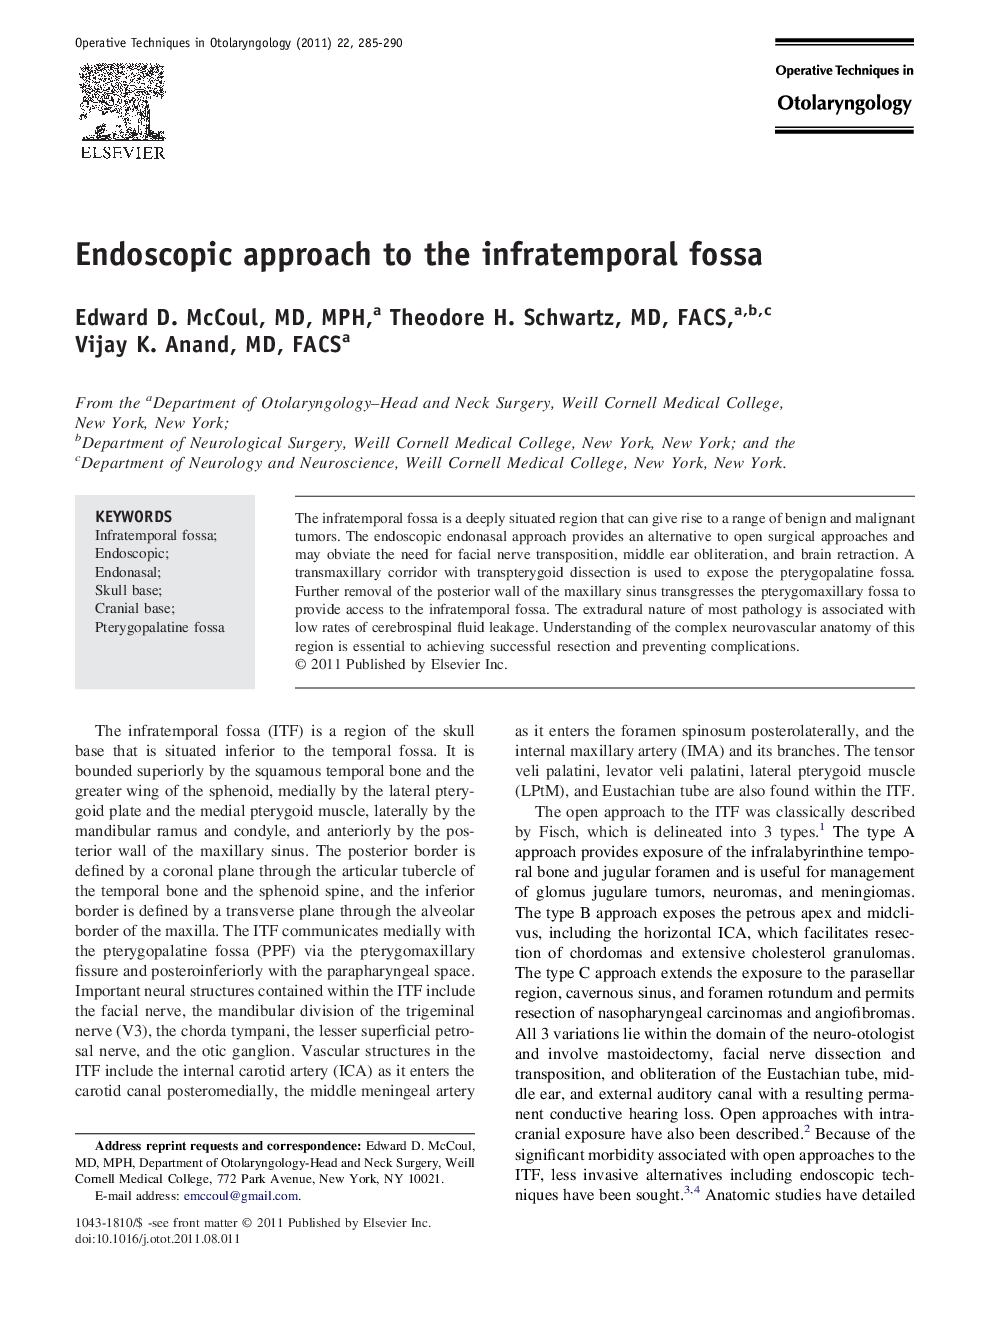 Endoscopic approach to the infratemporal fossa